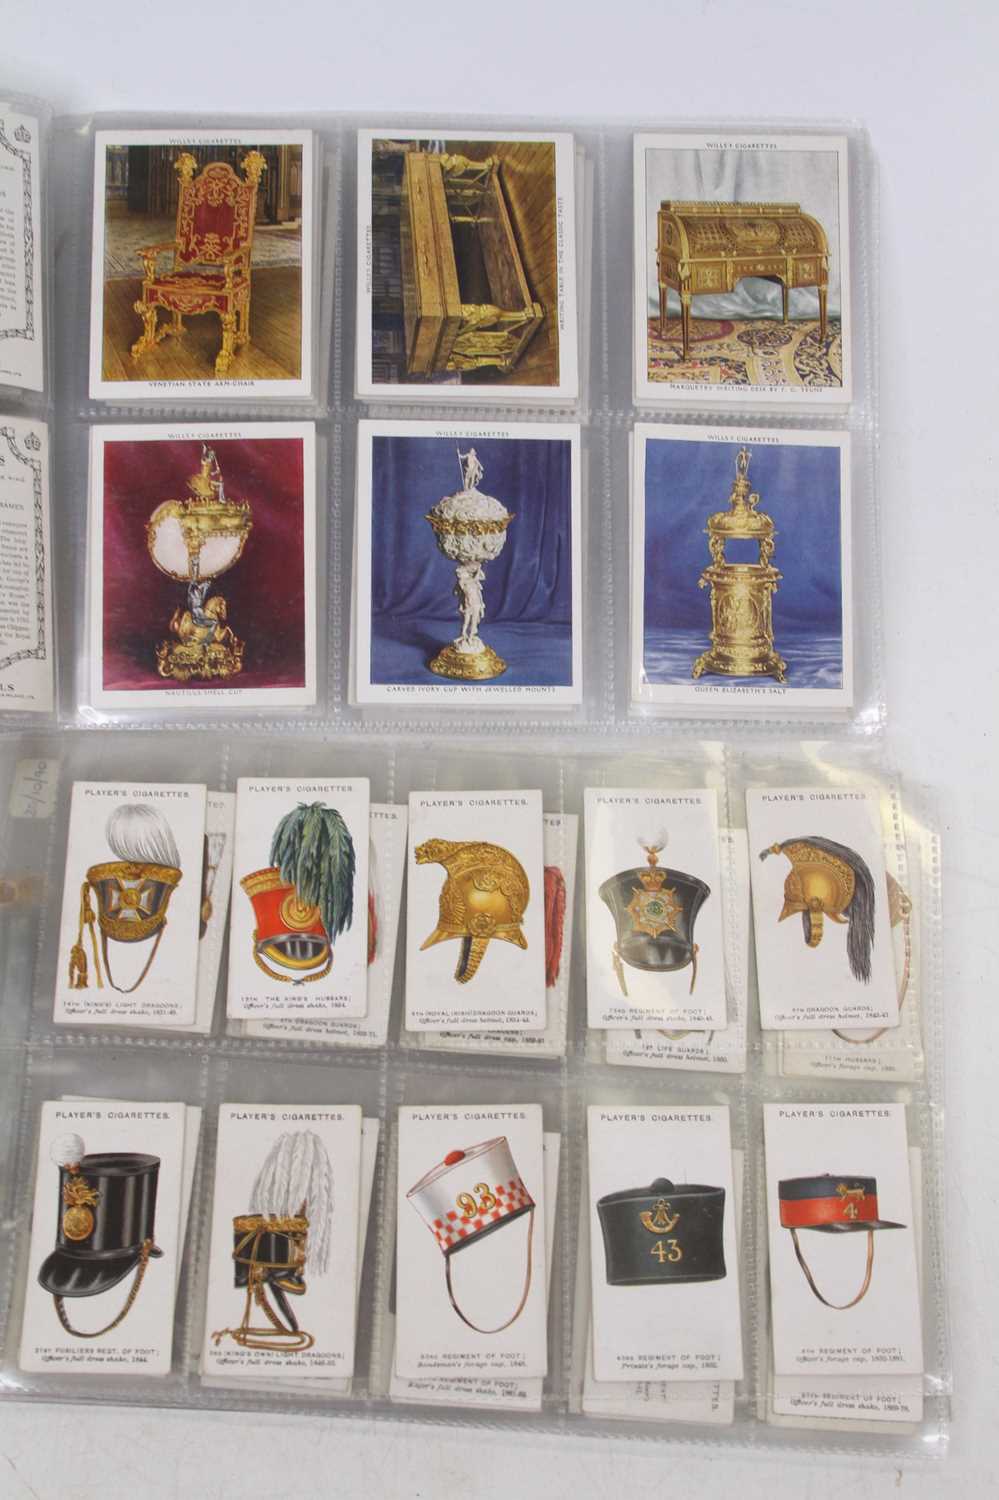 A collection of cigarette cards to include Players Cigarettes, military headdress, and Wills